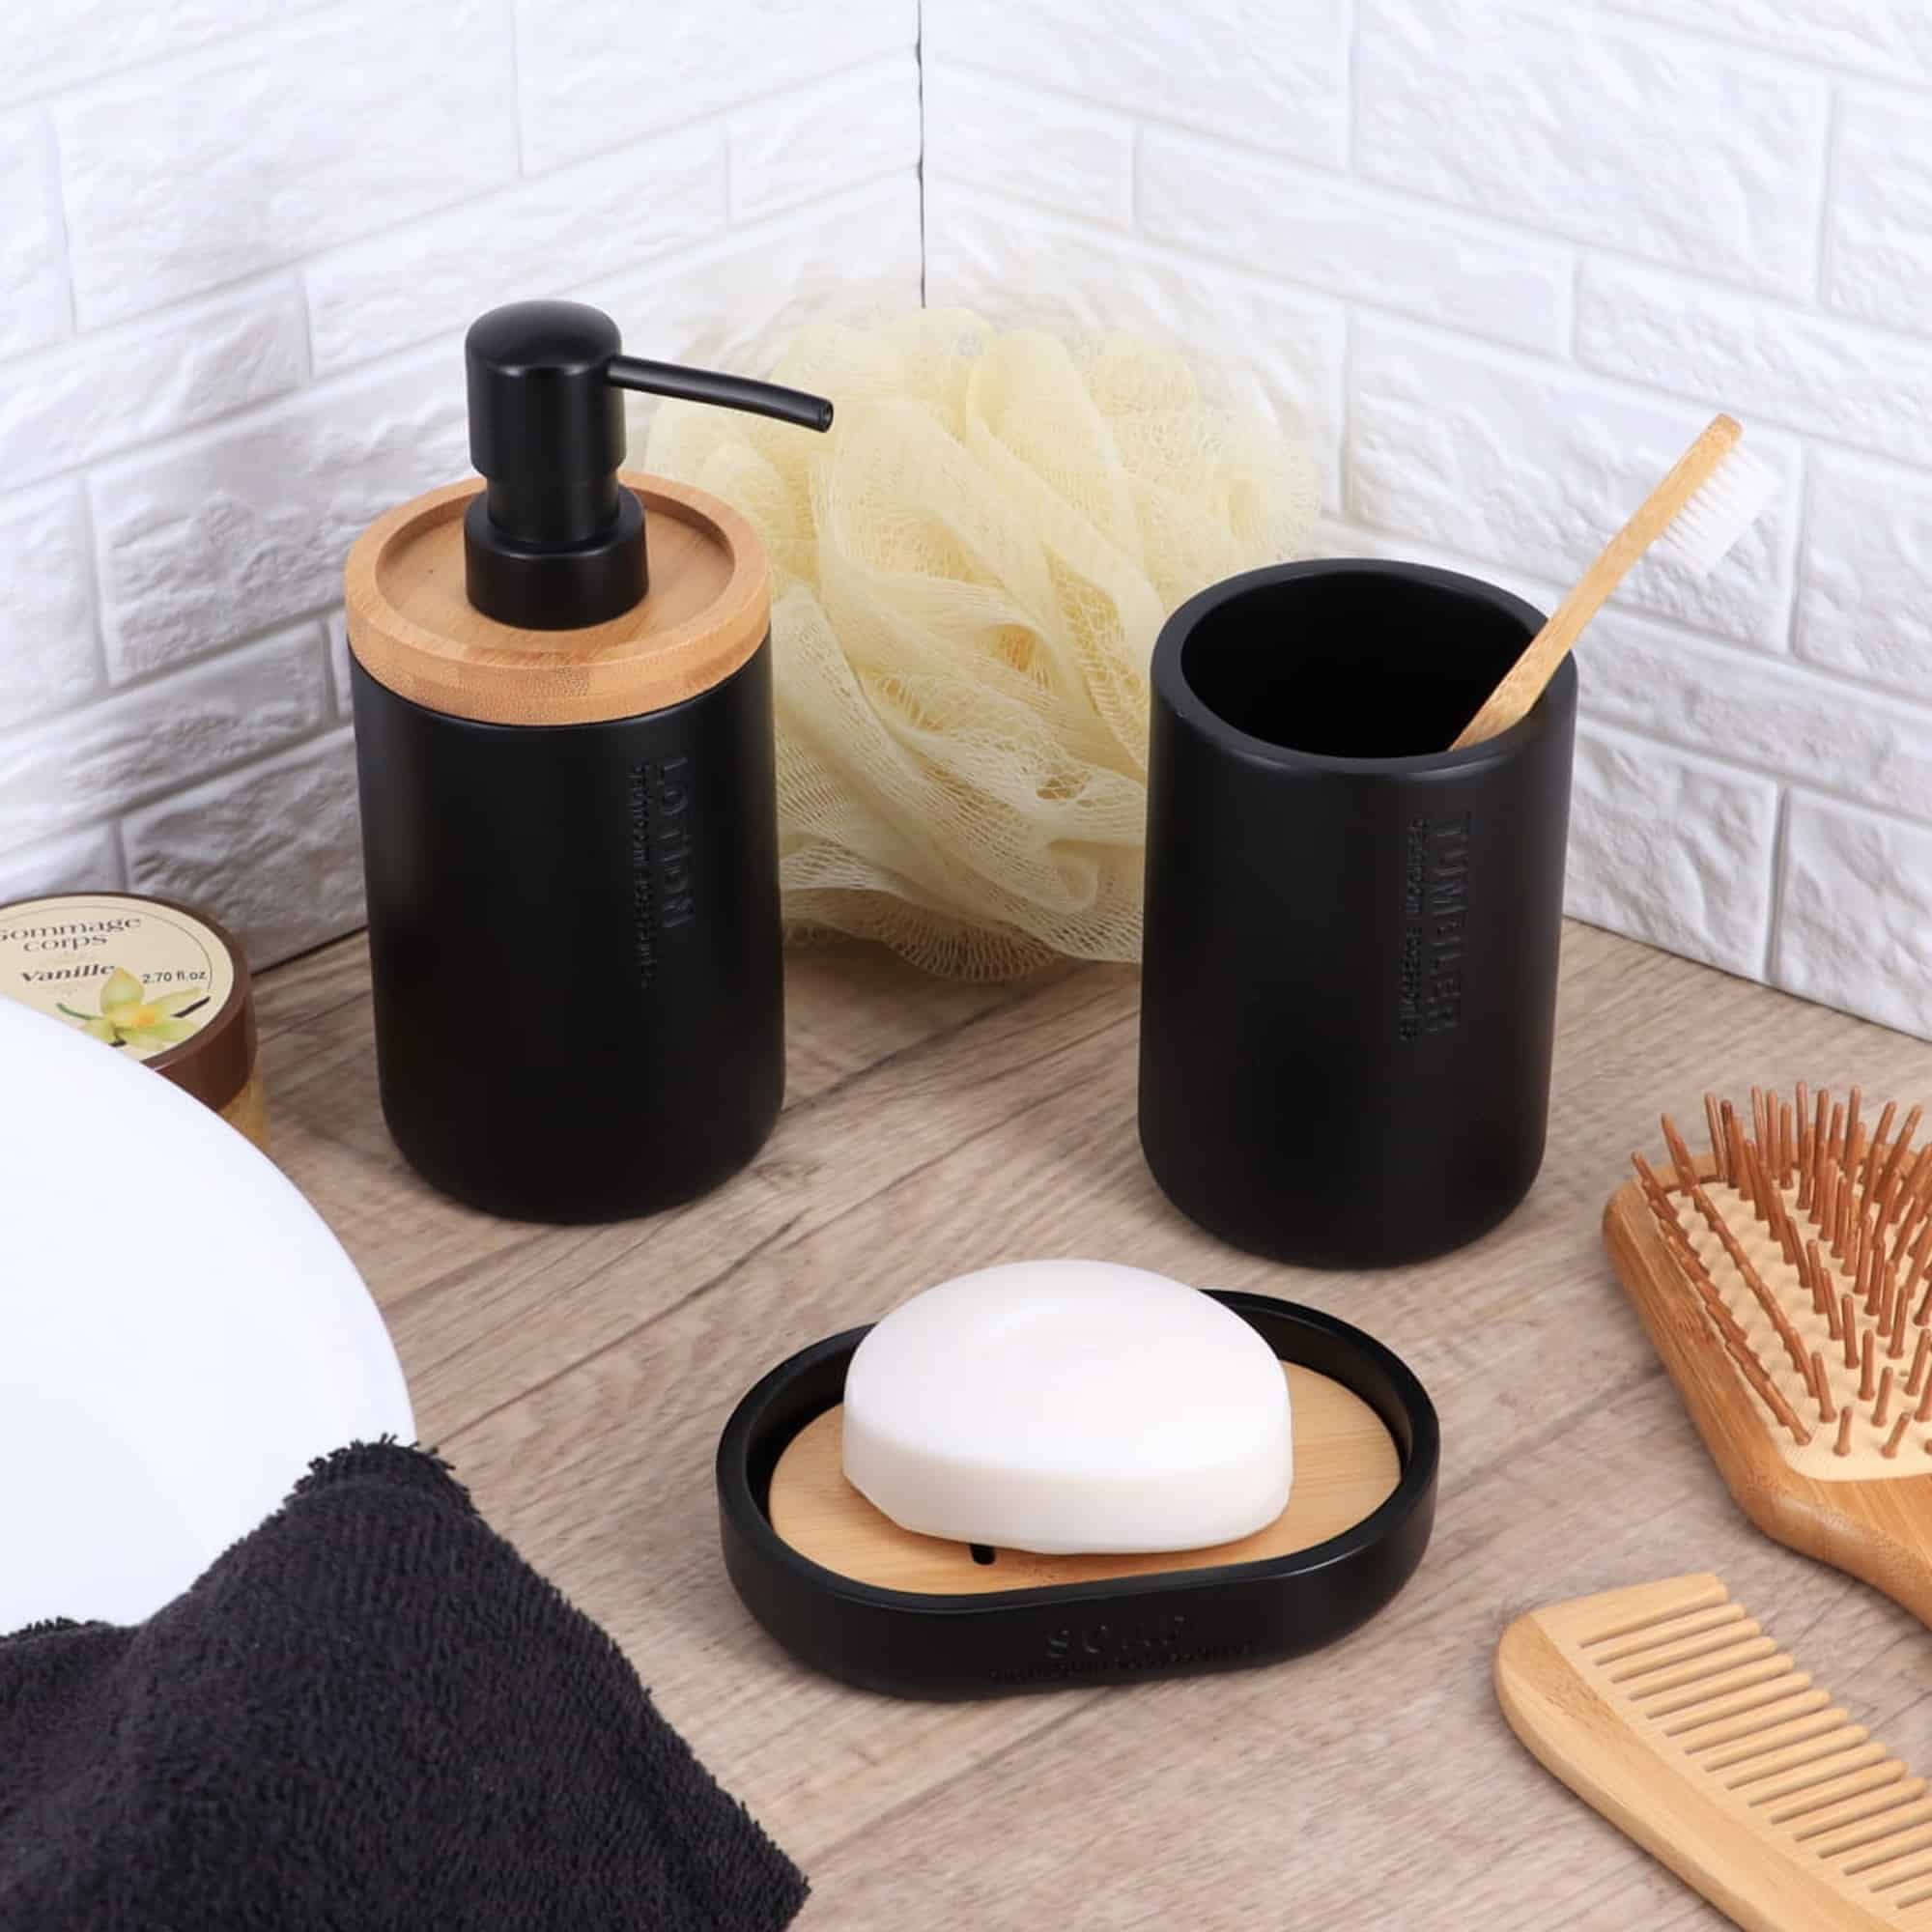 Matching collection with obsidian black soap dispenser soap dish toilet brush cotton box